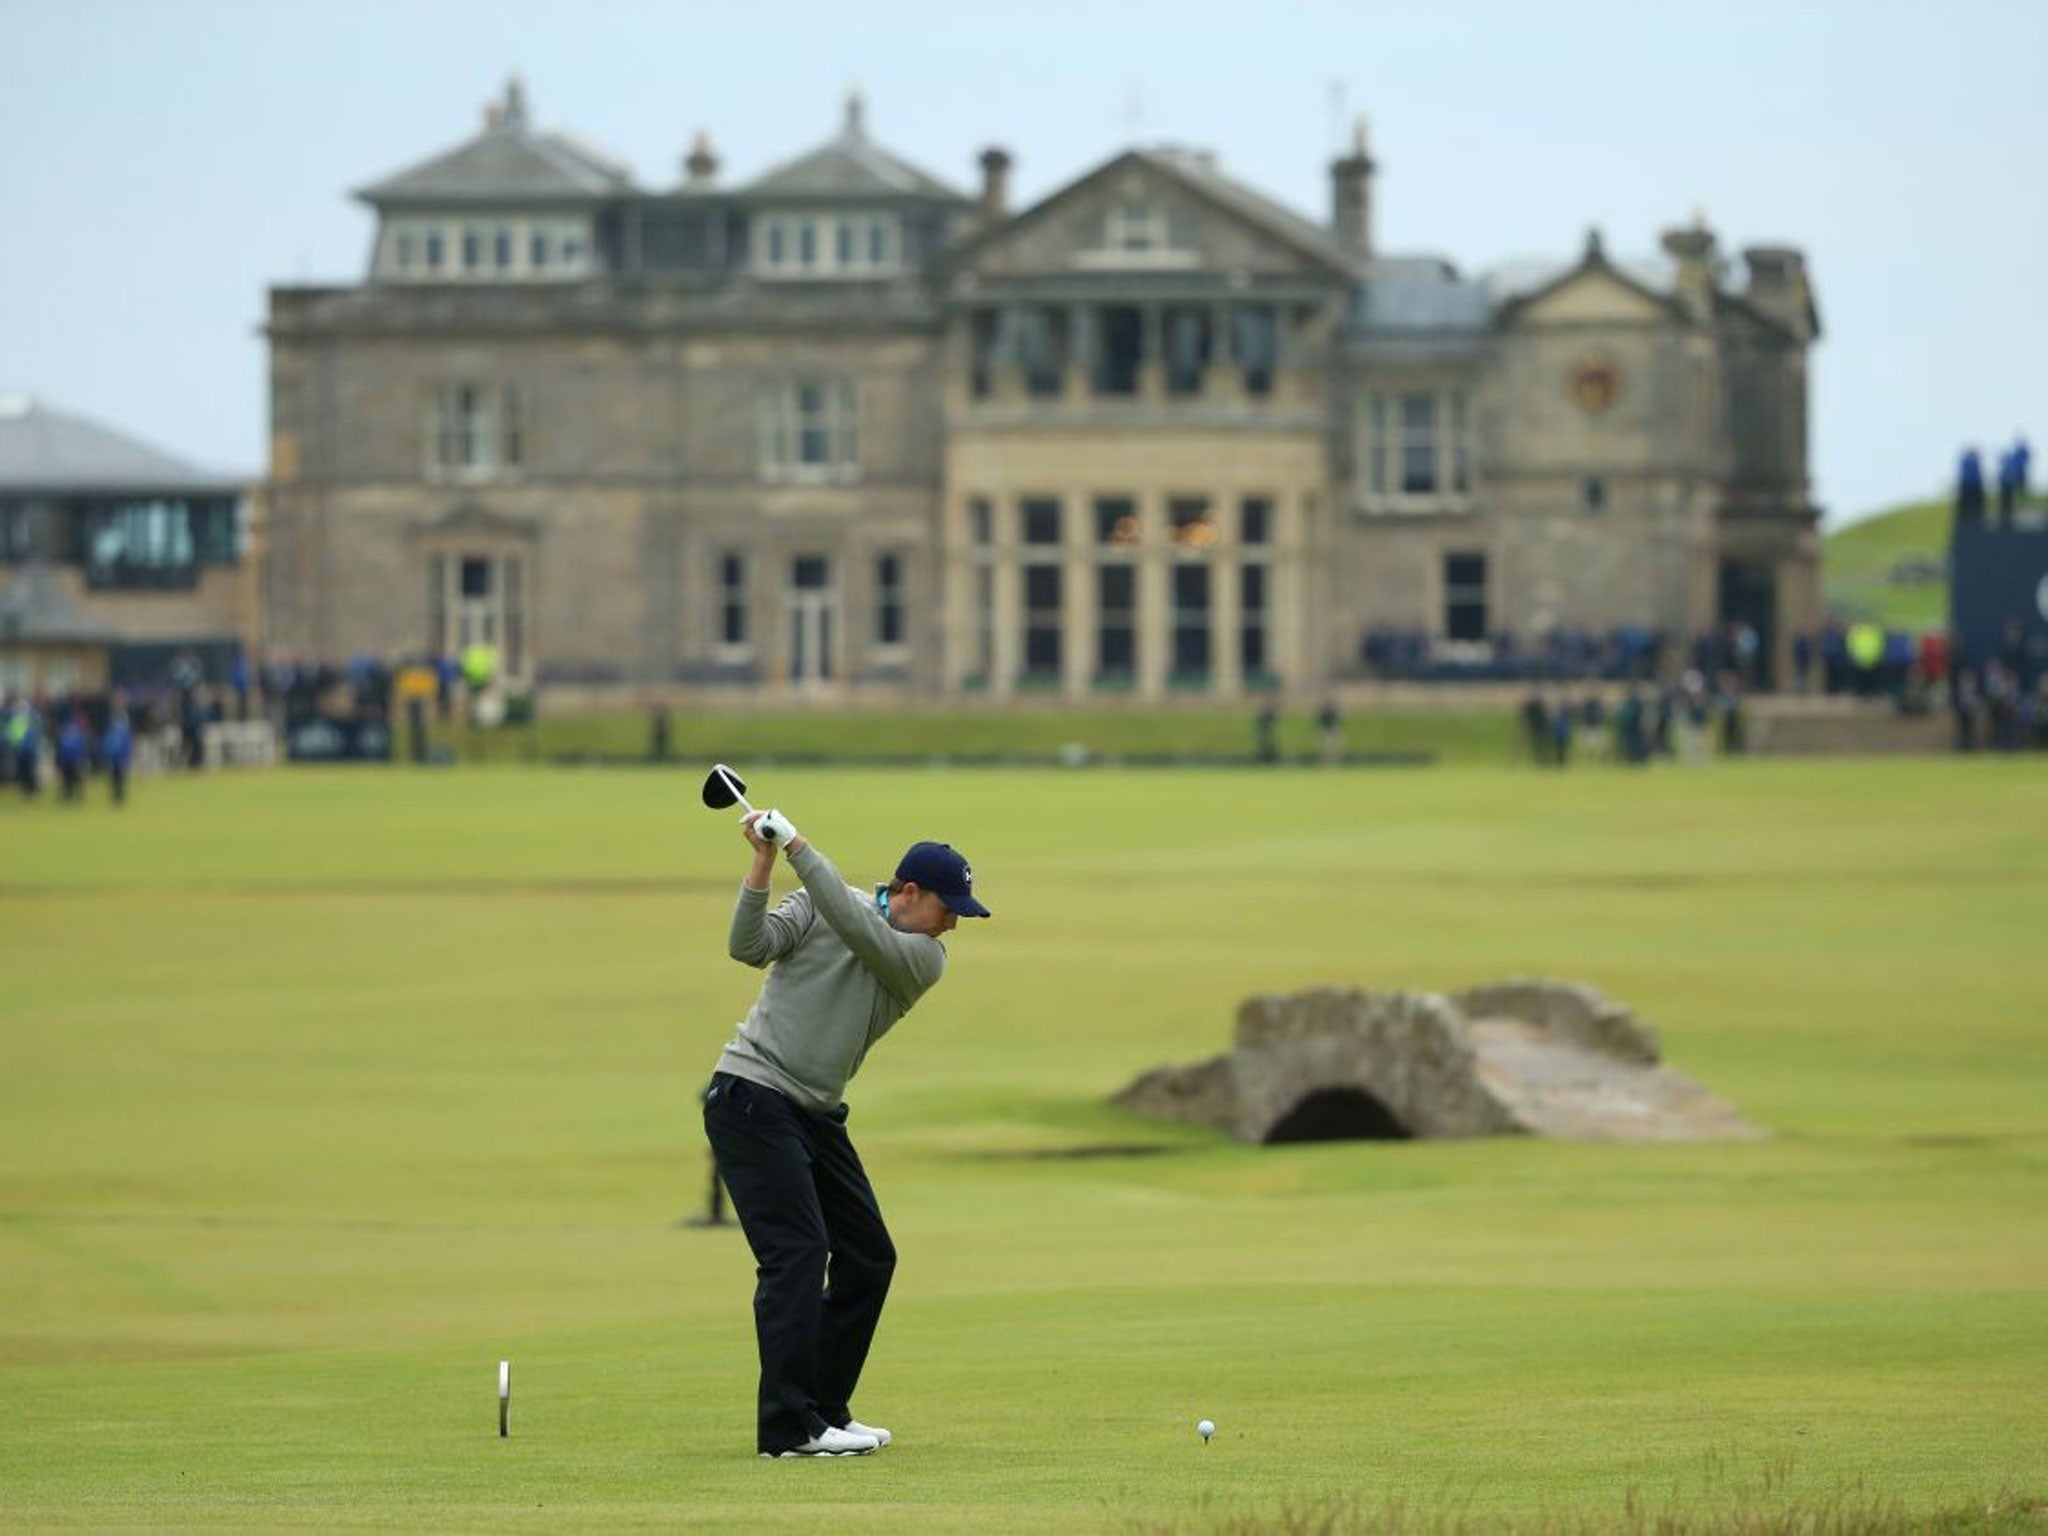 A reader hit trouble after booking accommodation in a St Andrews hostel for the Open